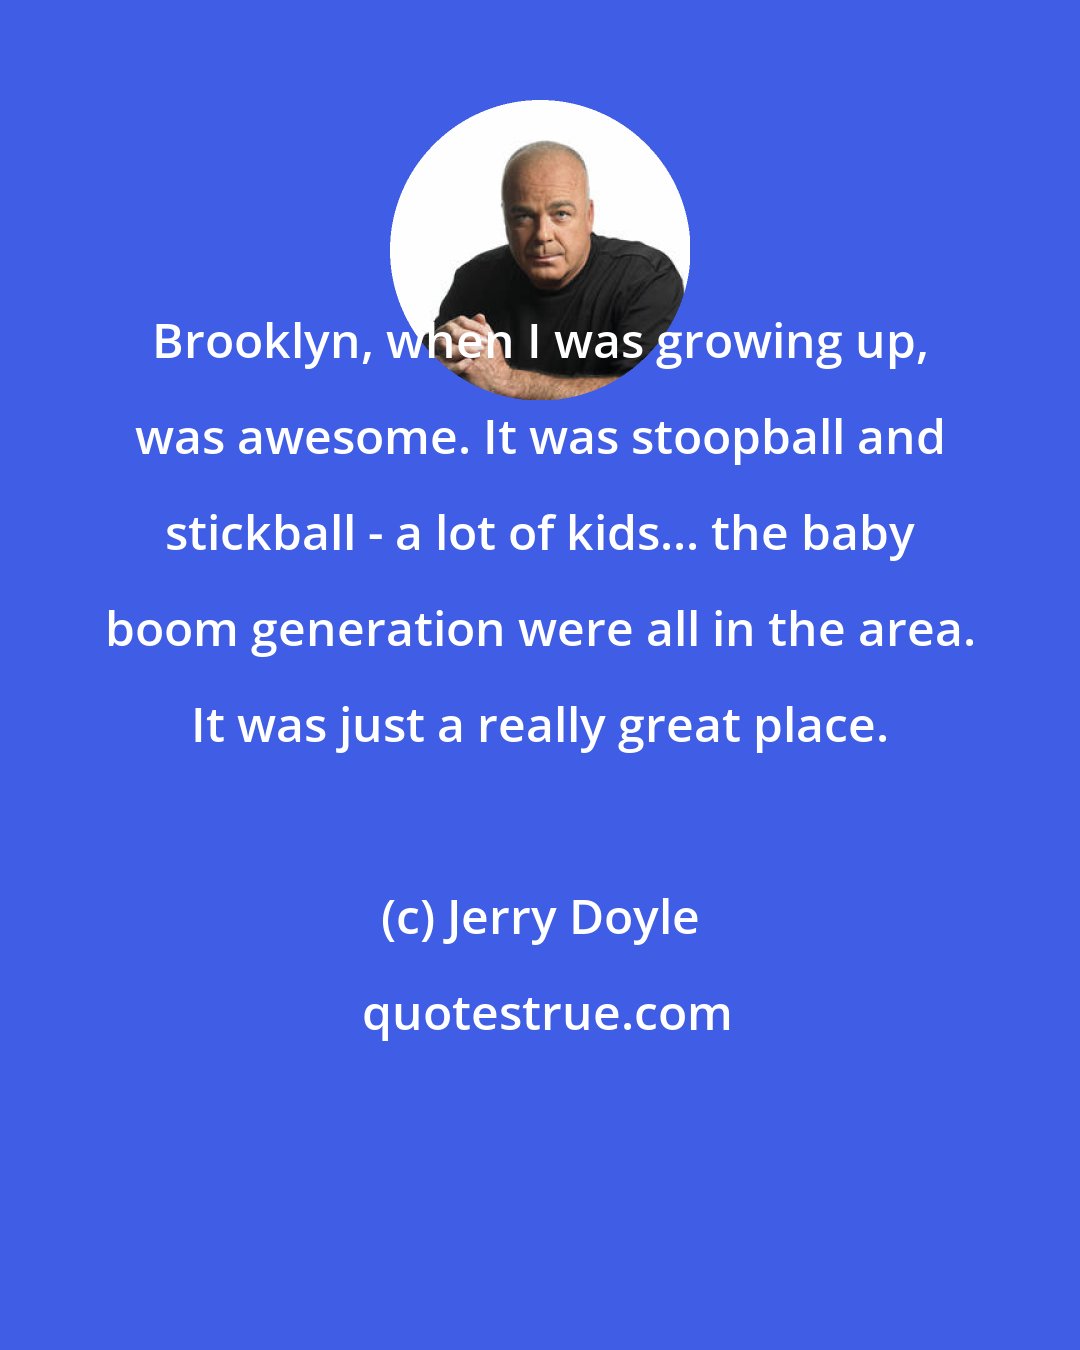 Jerry Doyle: Brooklyn, when I was growing up, was awesome. It was stoopball and stickball - a lot of kids... the baby boom generation were all in the area. It was just a really great place.